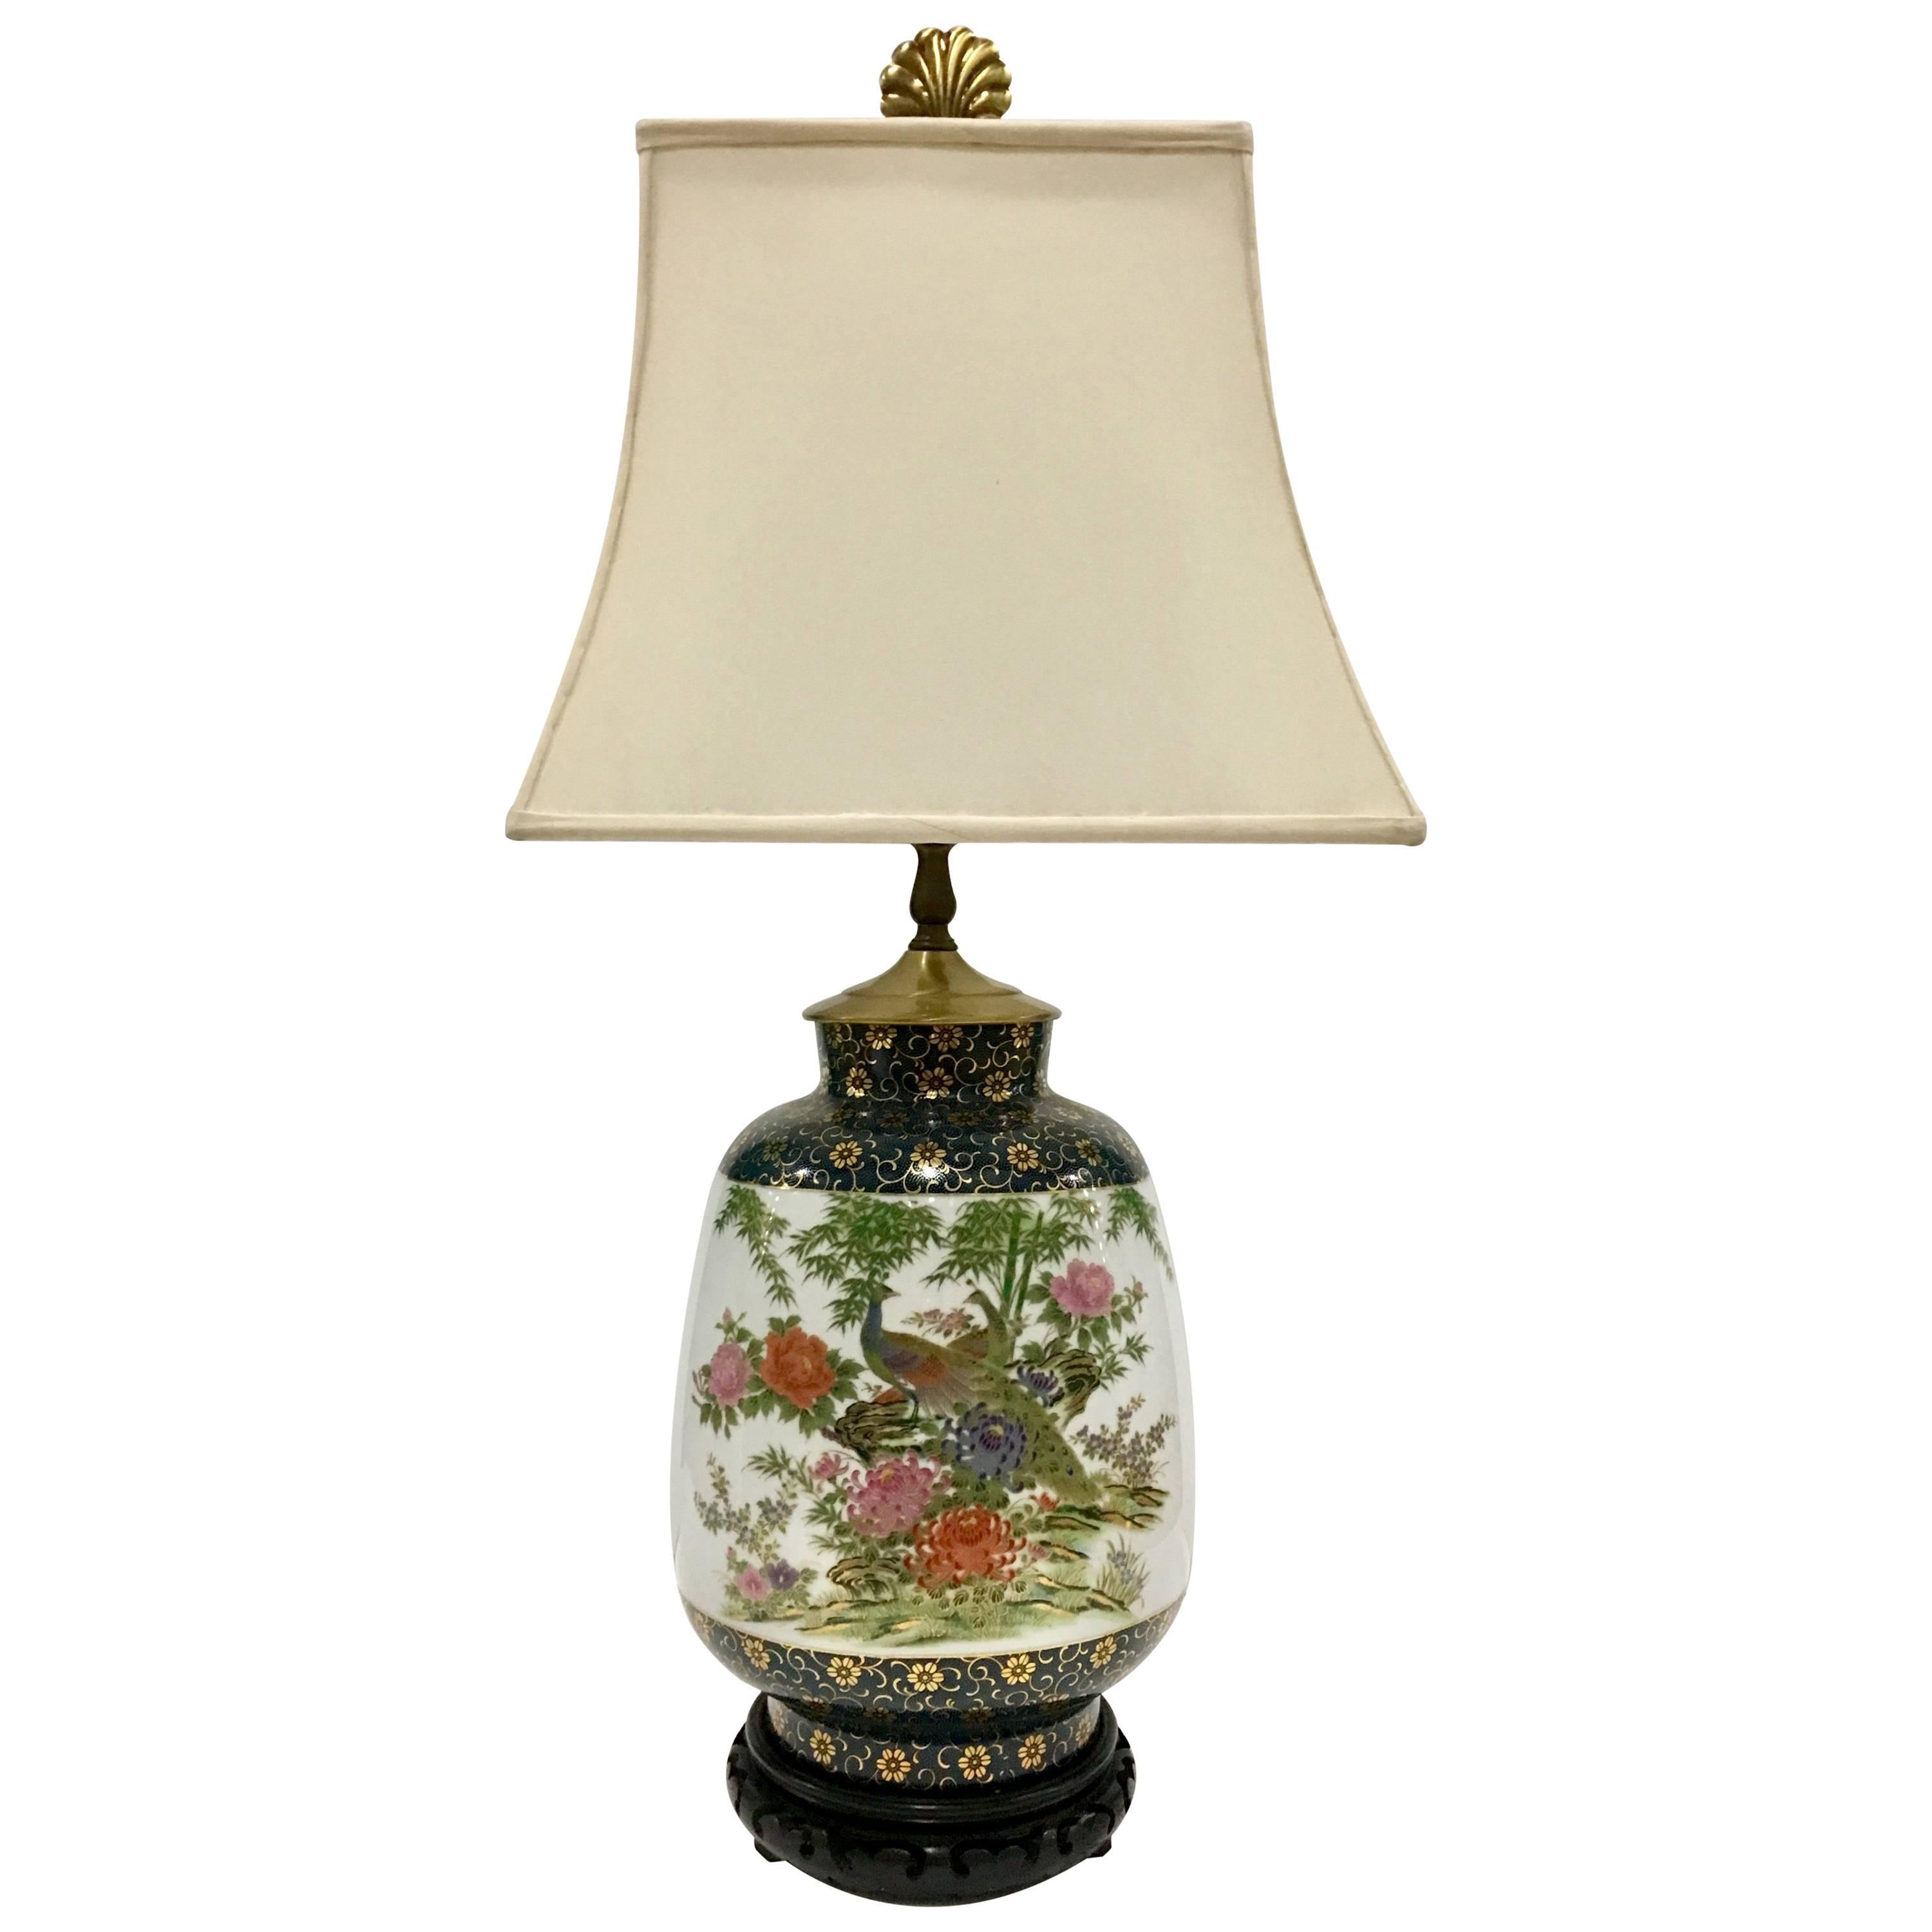 Vintage Frederick Cooper Hand-Painted Porcelain and Gilt "Peacock" Table Lamp